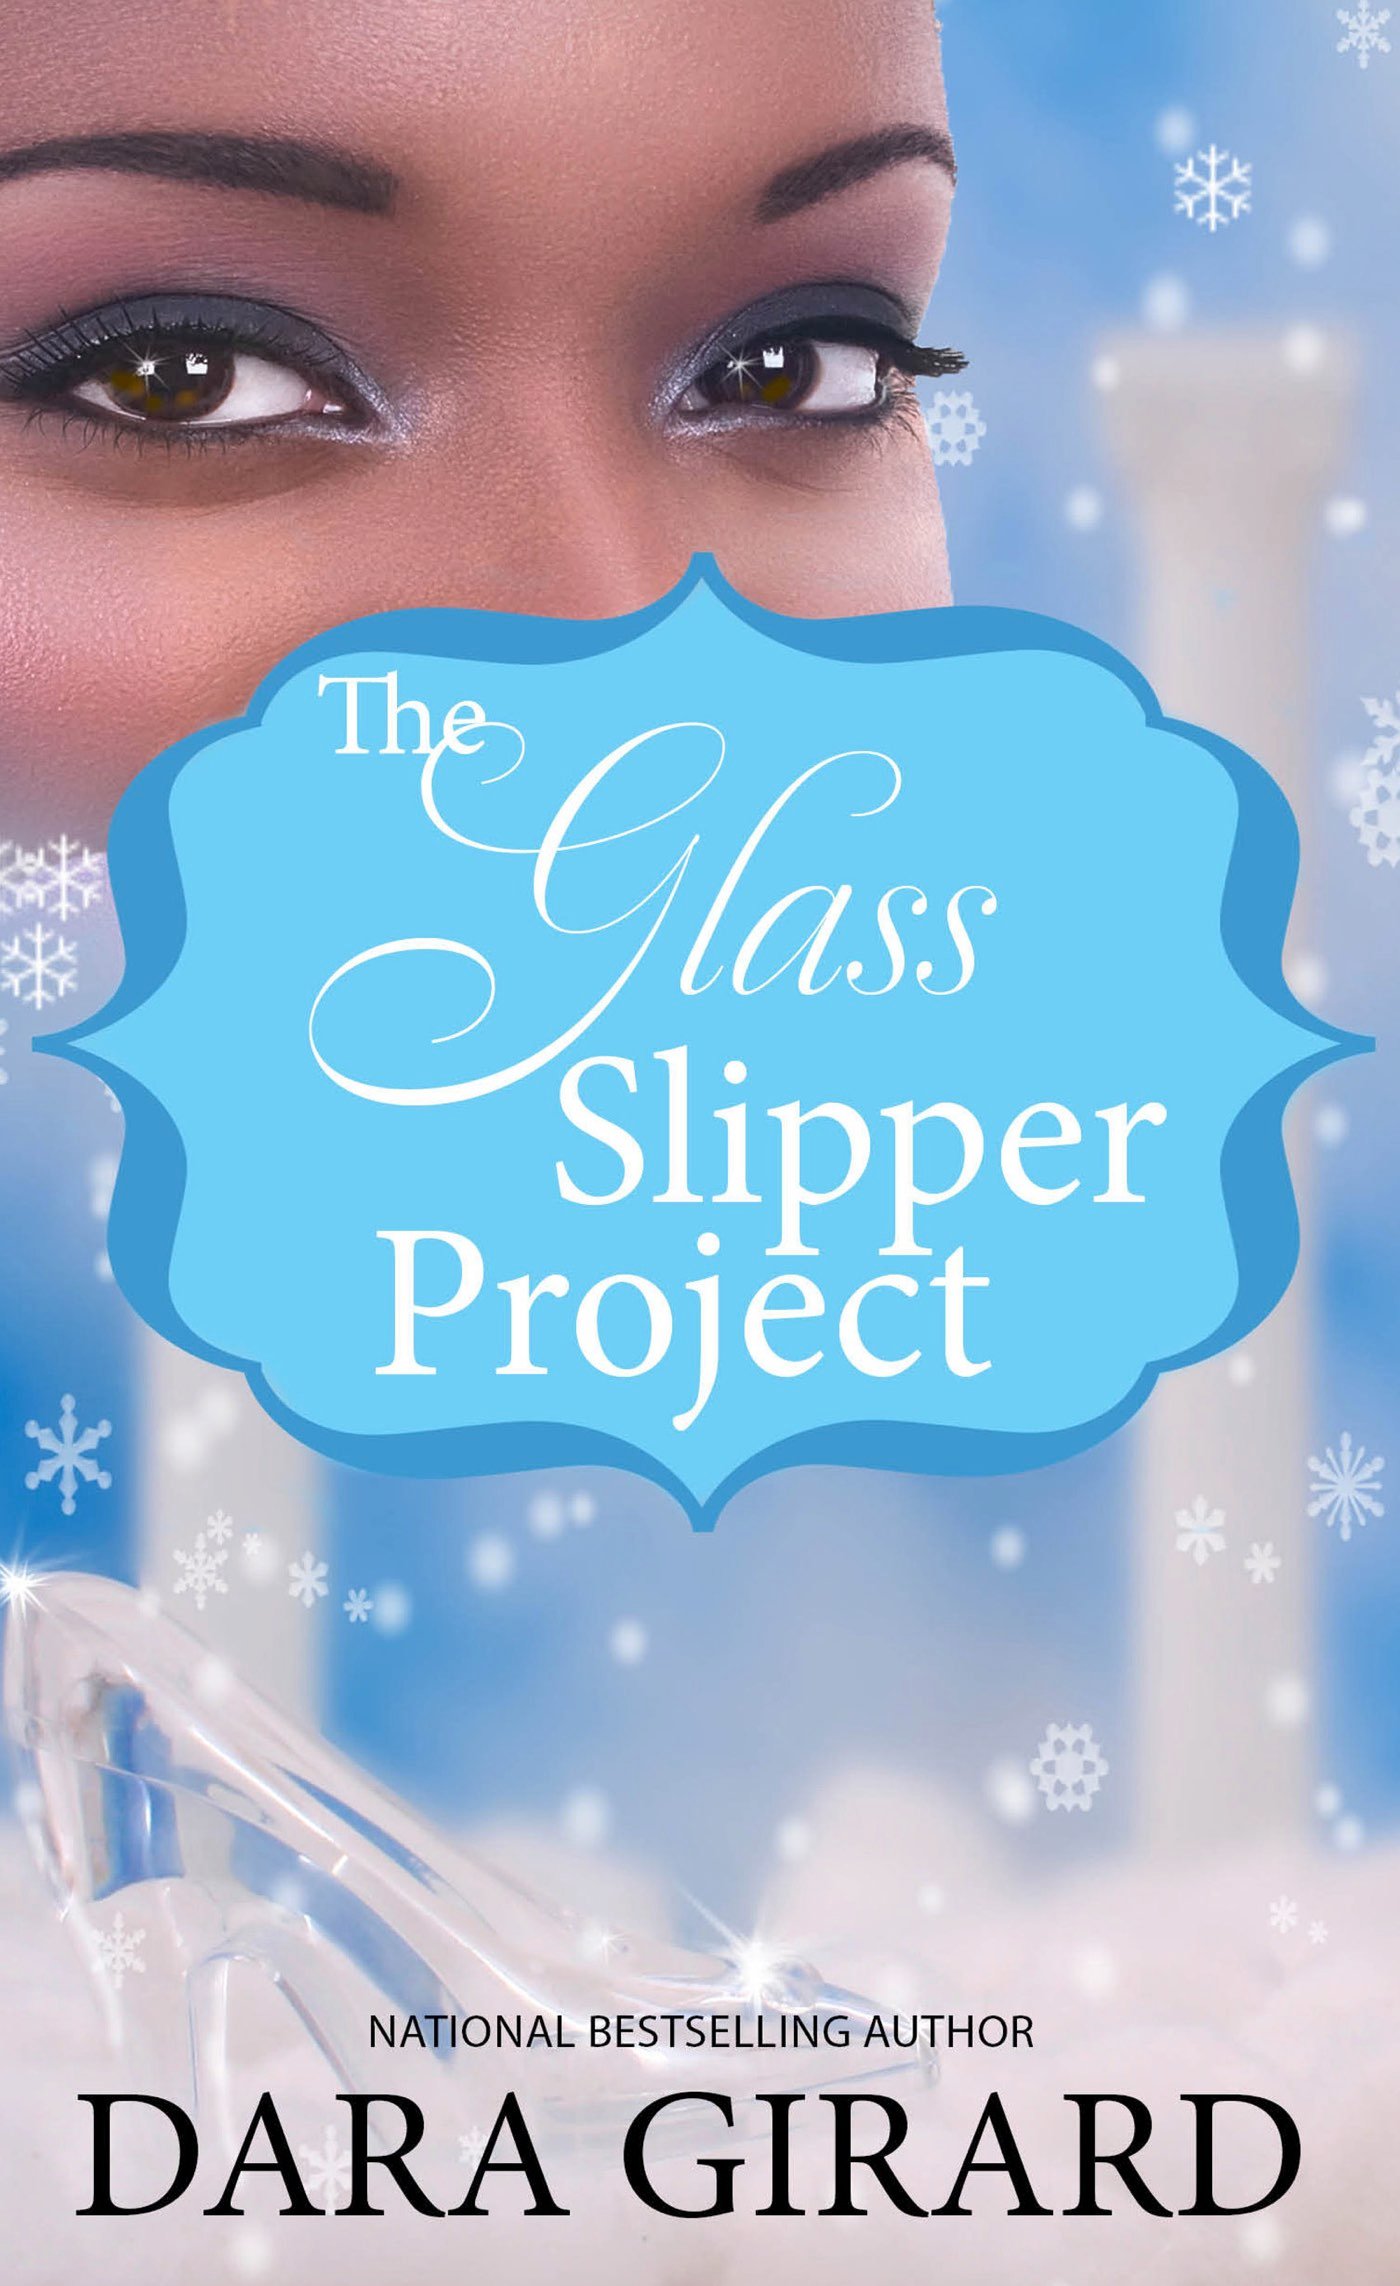 The-Glass-Slipper-Project-Generic